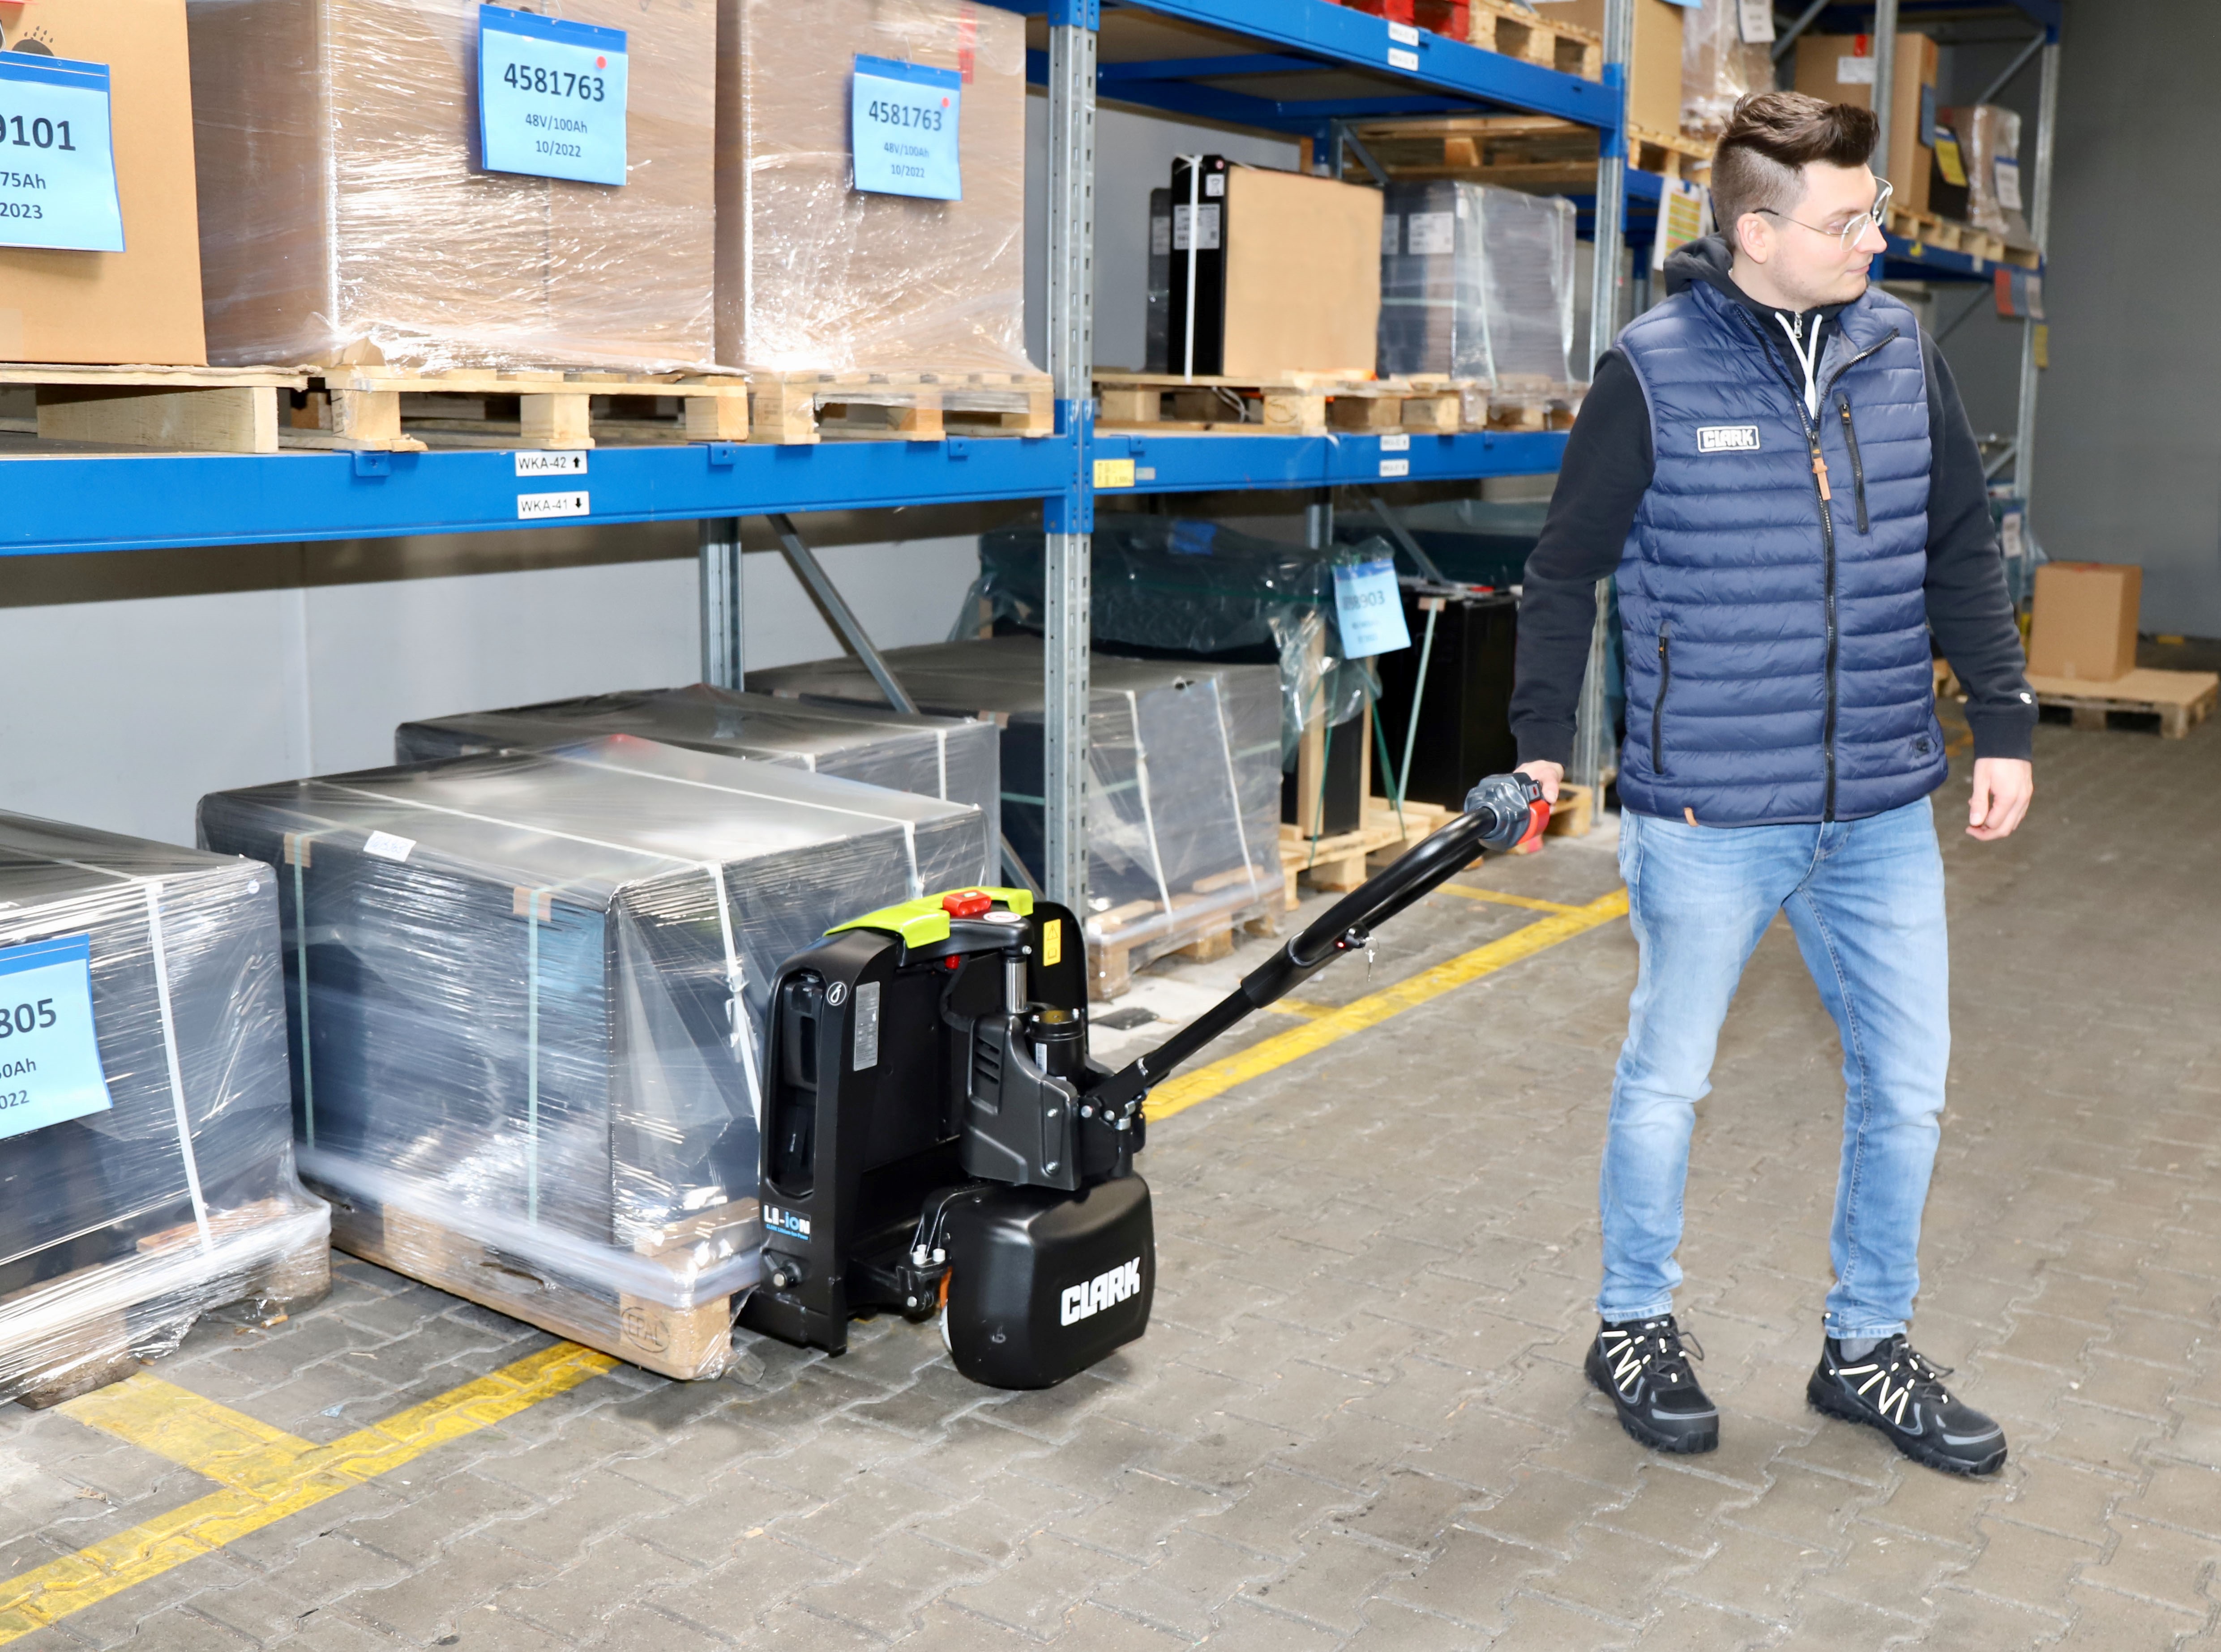 The low-lift truck is extremely compact and maoeuvrable with a length to the front of the forks (L2 dimension) of only 400 mm and an aisle width of only 1810 mm